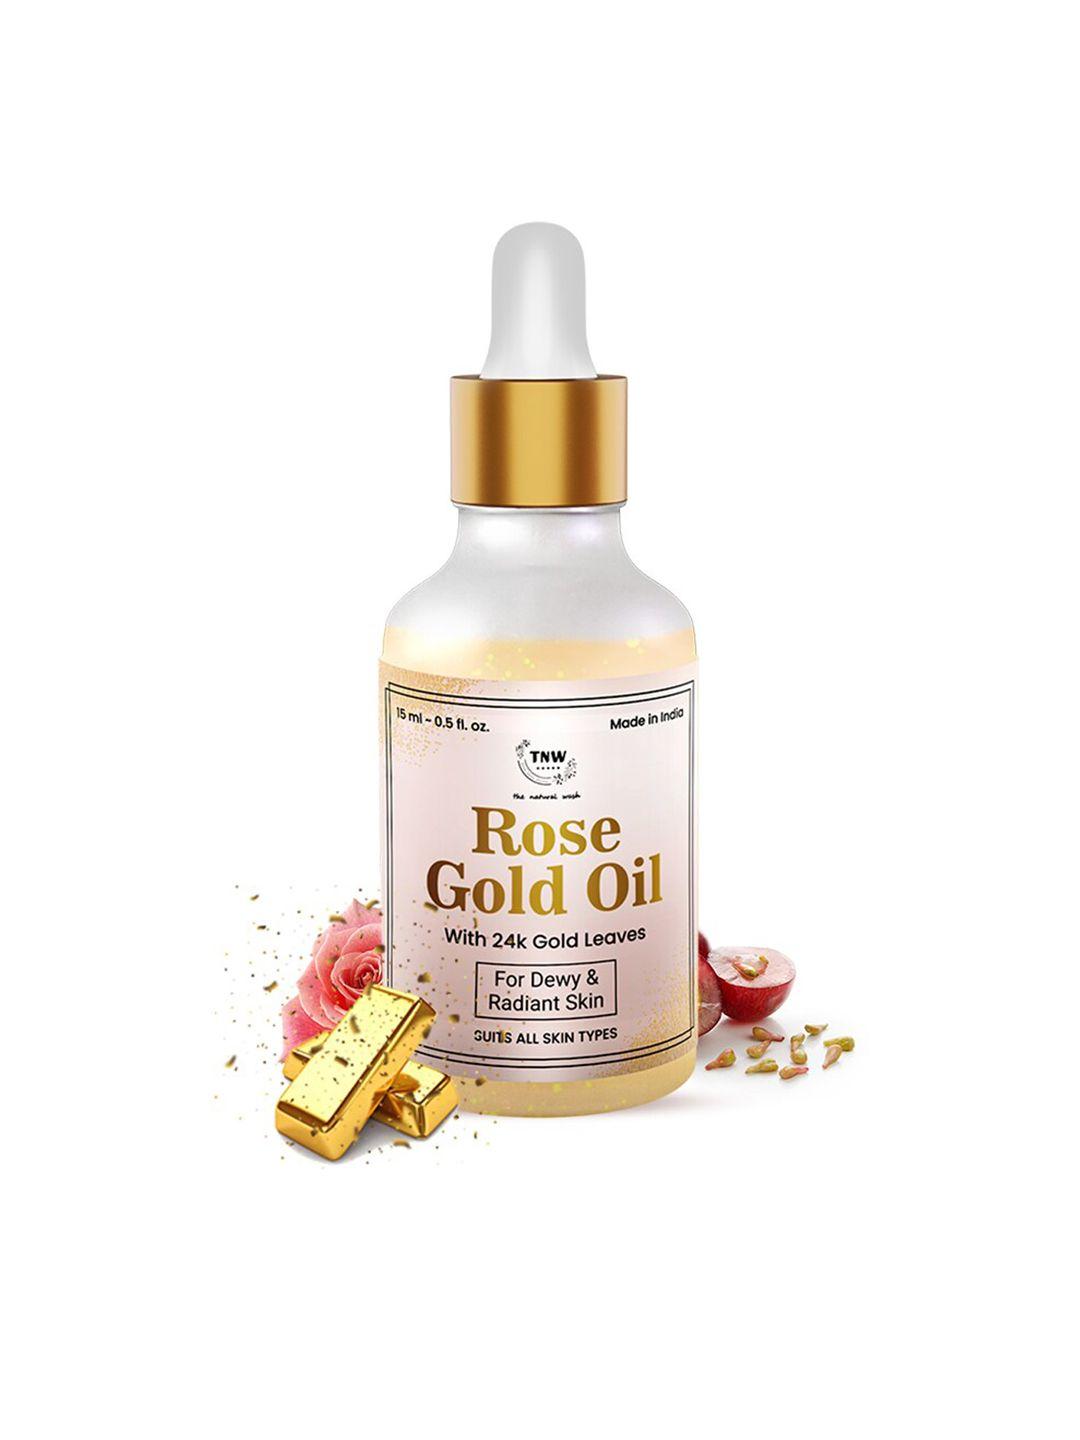 tnw the natural wash 15ml rose gold oil with 24k gold leaves for dewy and radiant skin